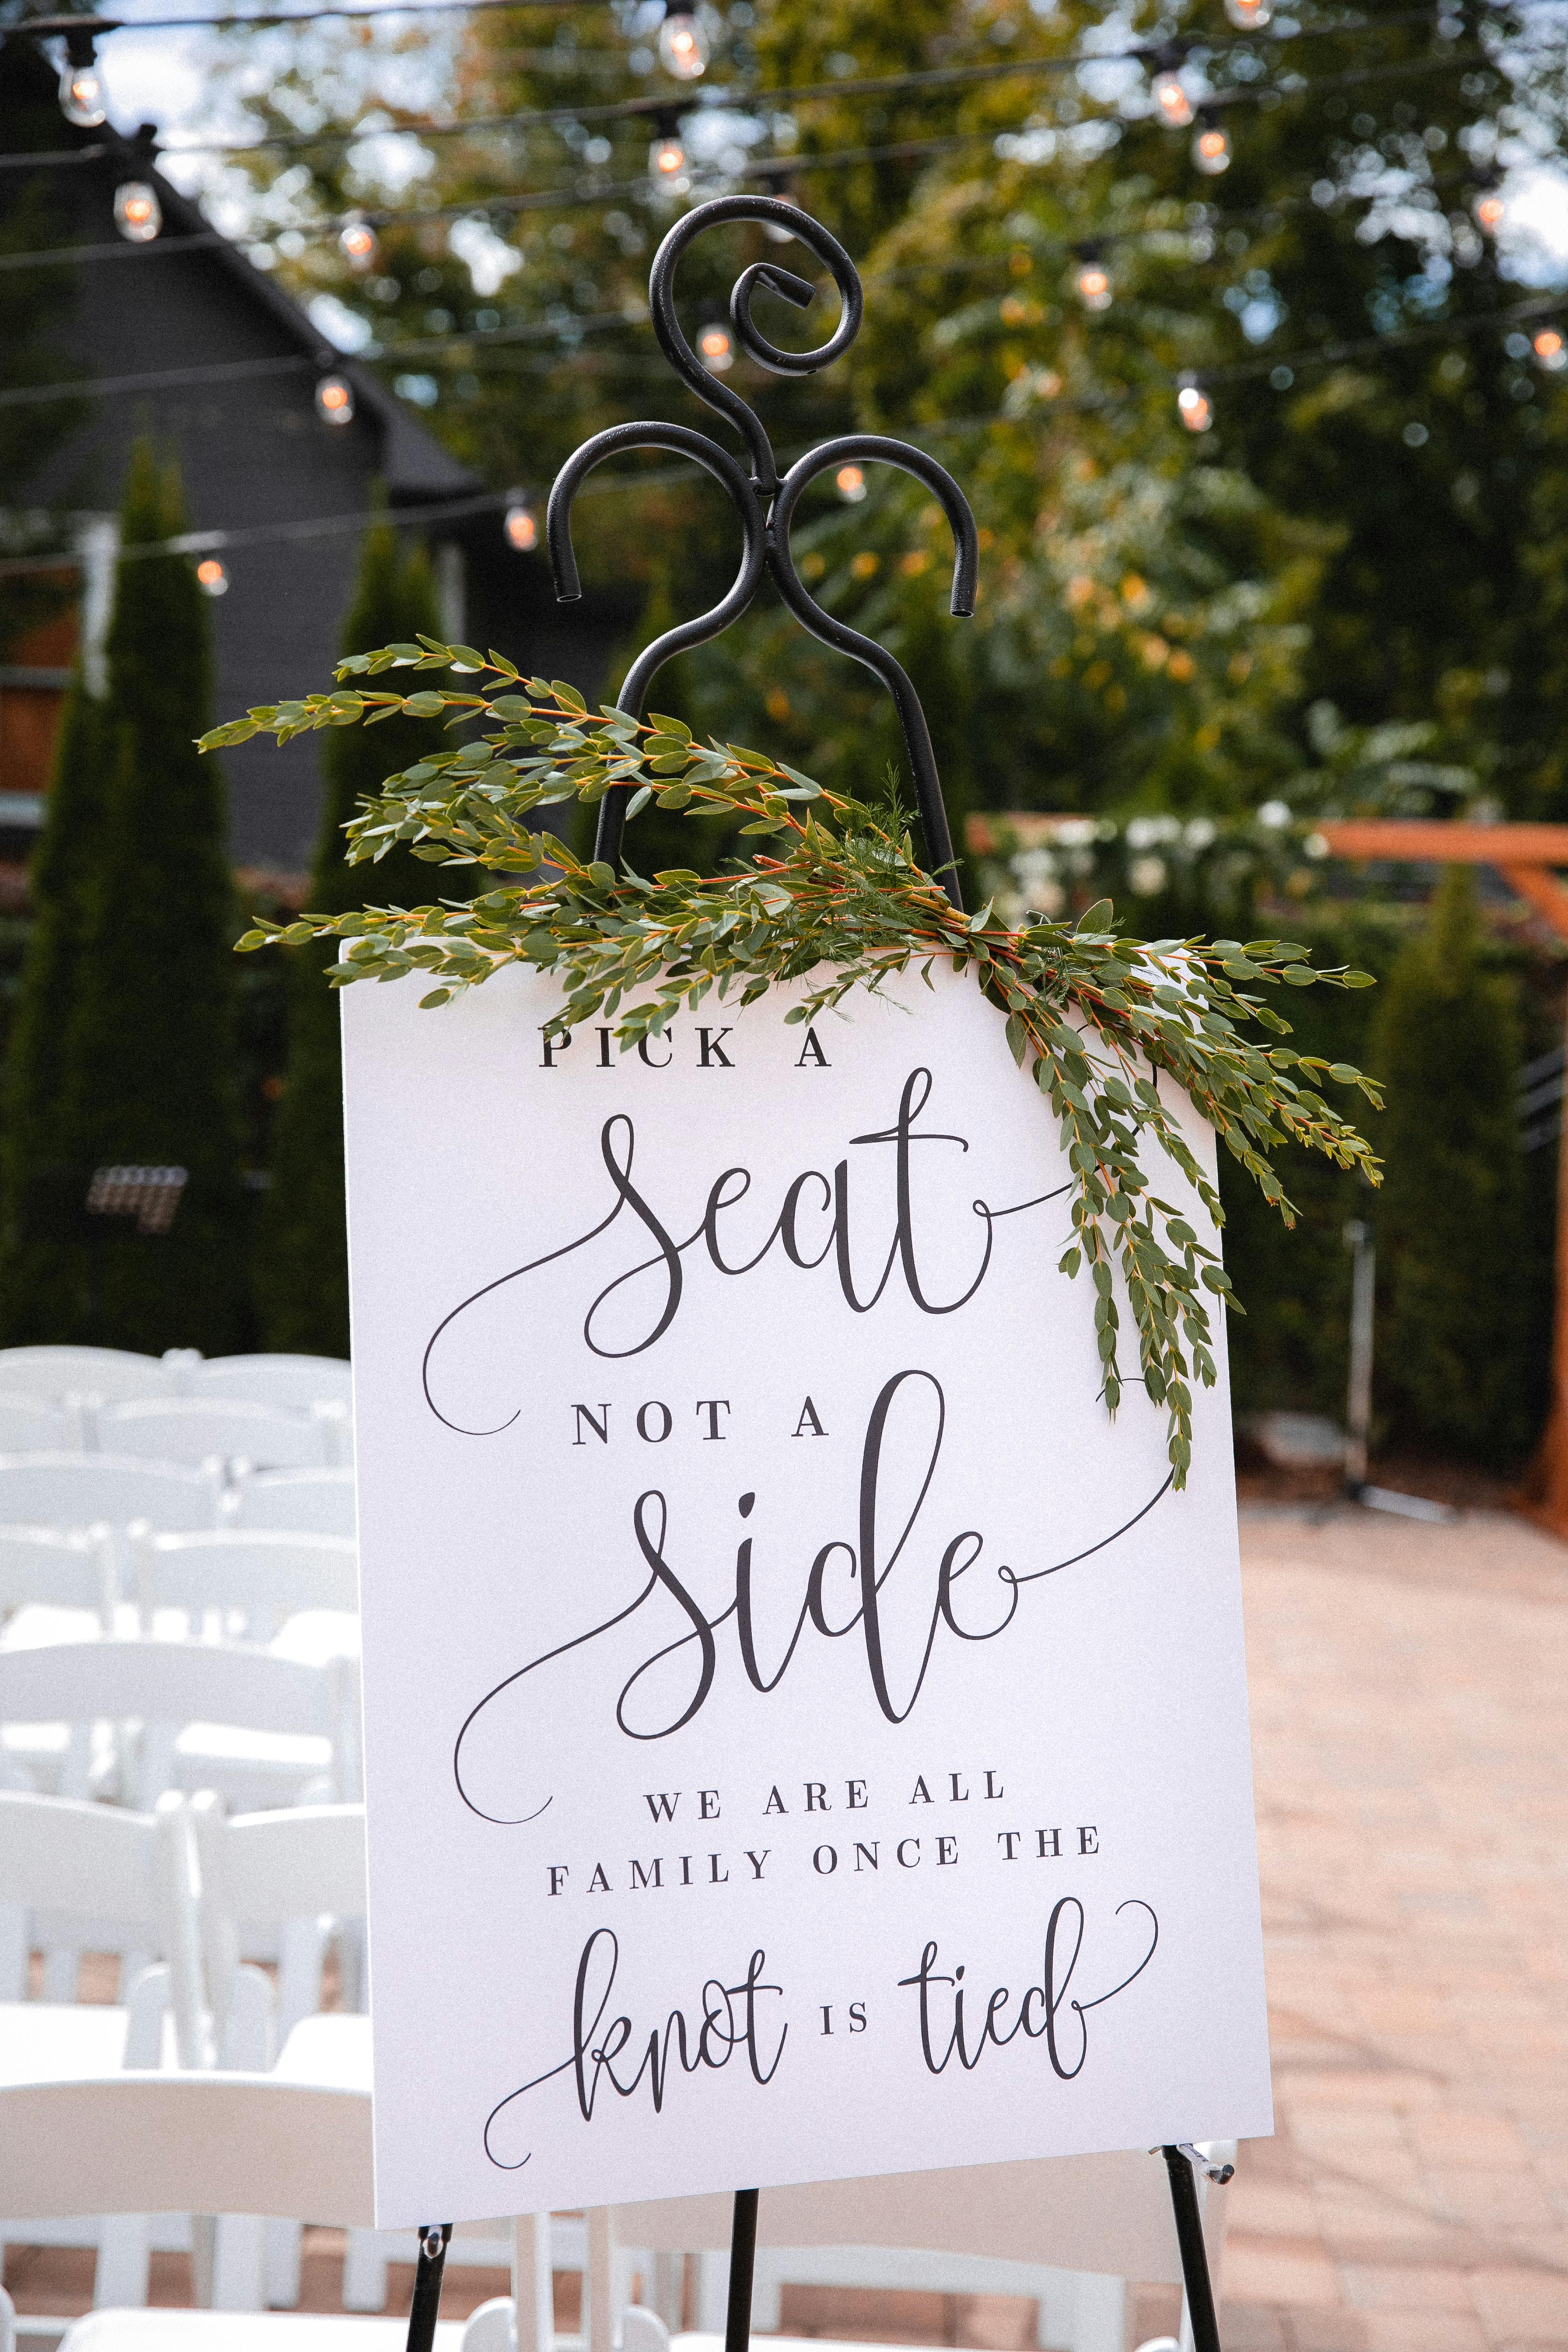 For illustration purposes only. Wedding venue with welcome card | Source: Pexels